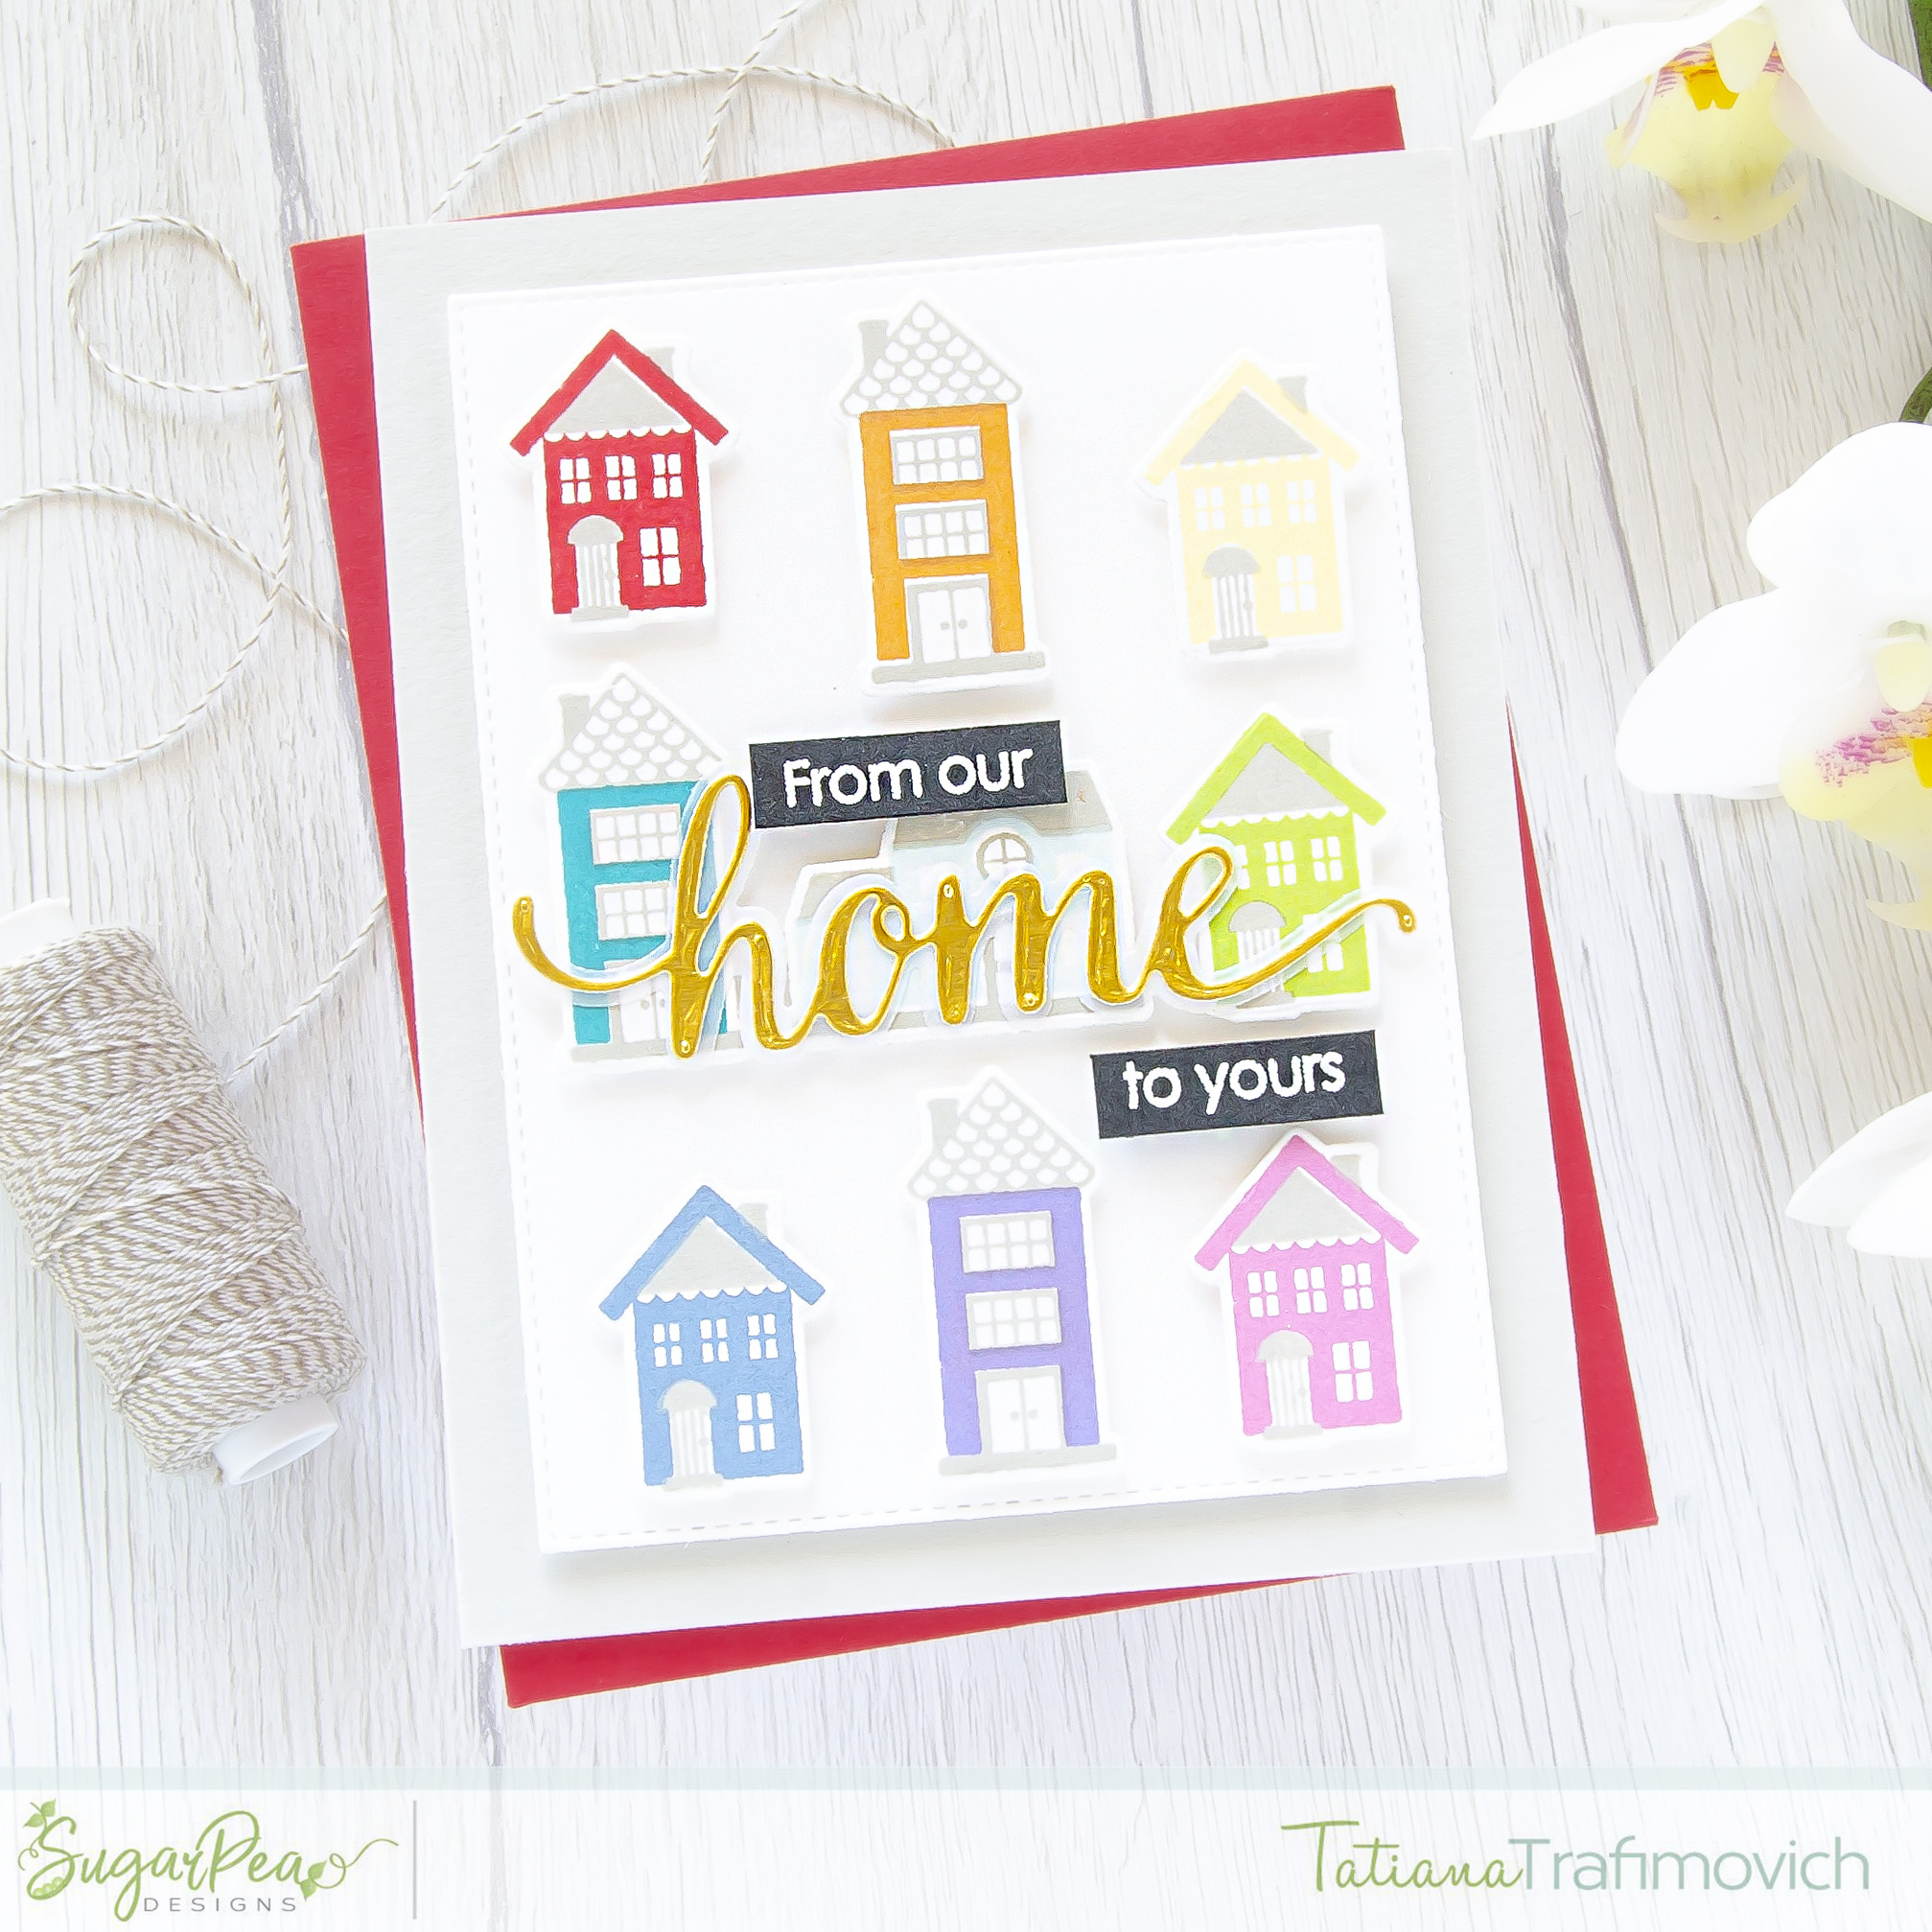 From Our Home To Yours #handmade card by Tatiana Trafimovich #tatianacraftandart - Little Village stamp set by SugarPea Designs #sugarpeadesigns